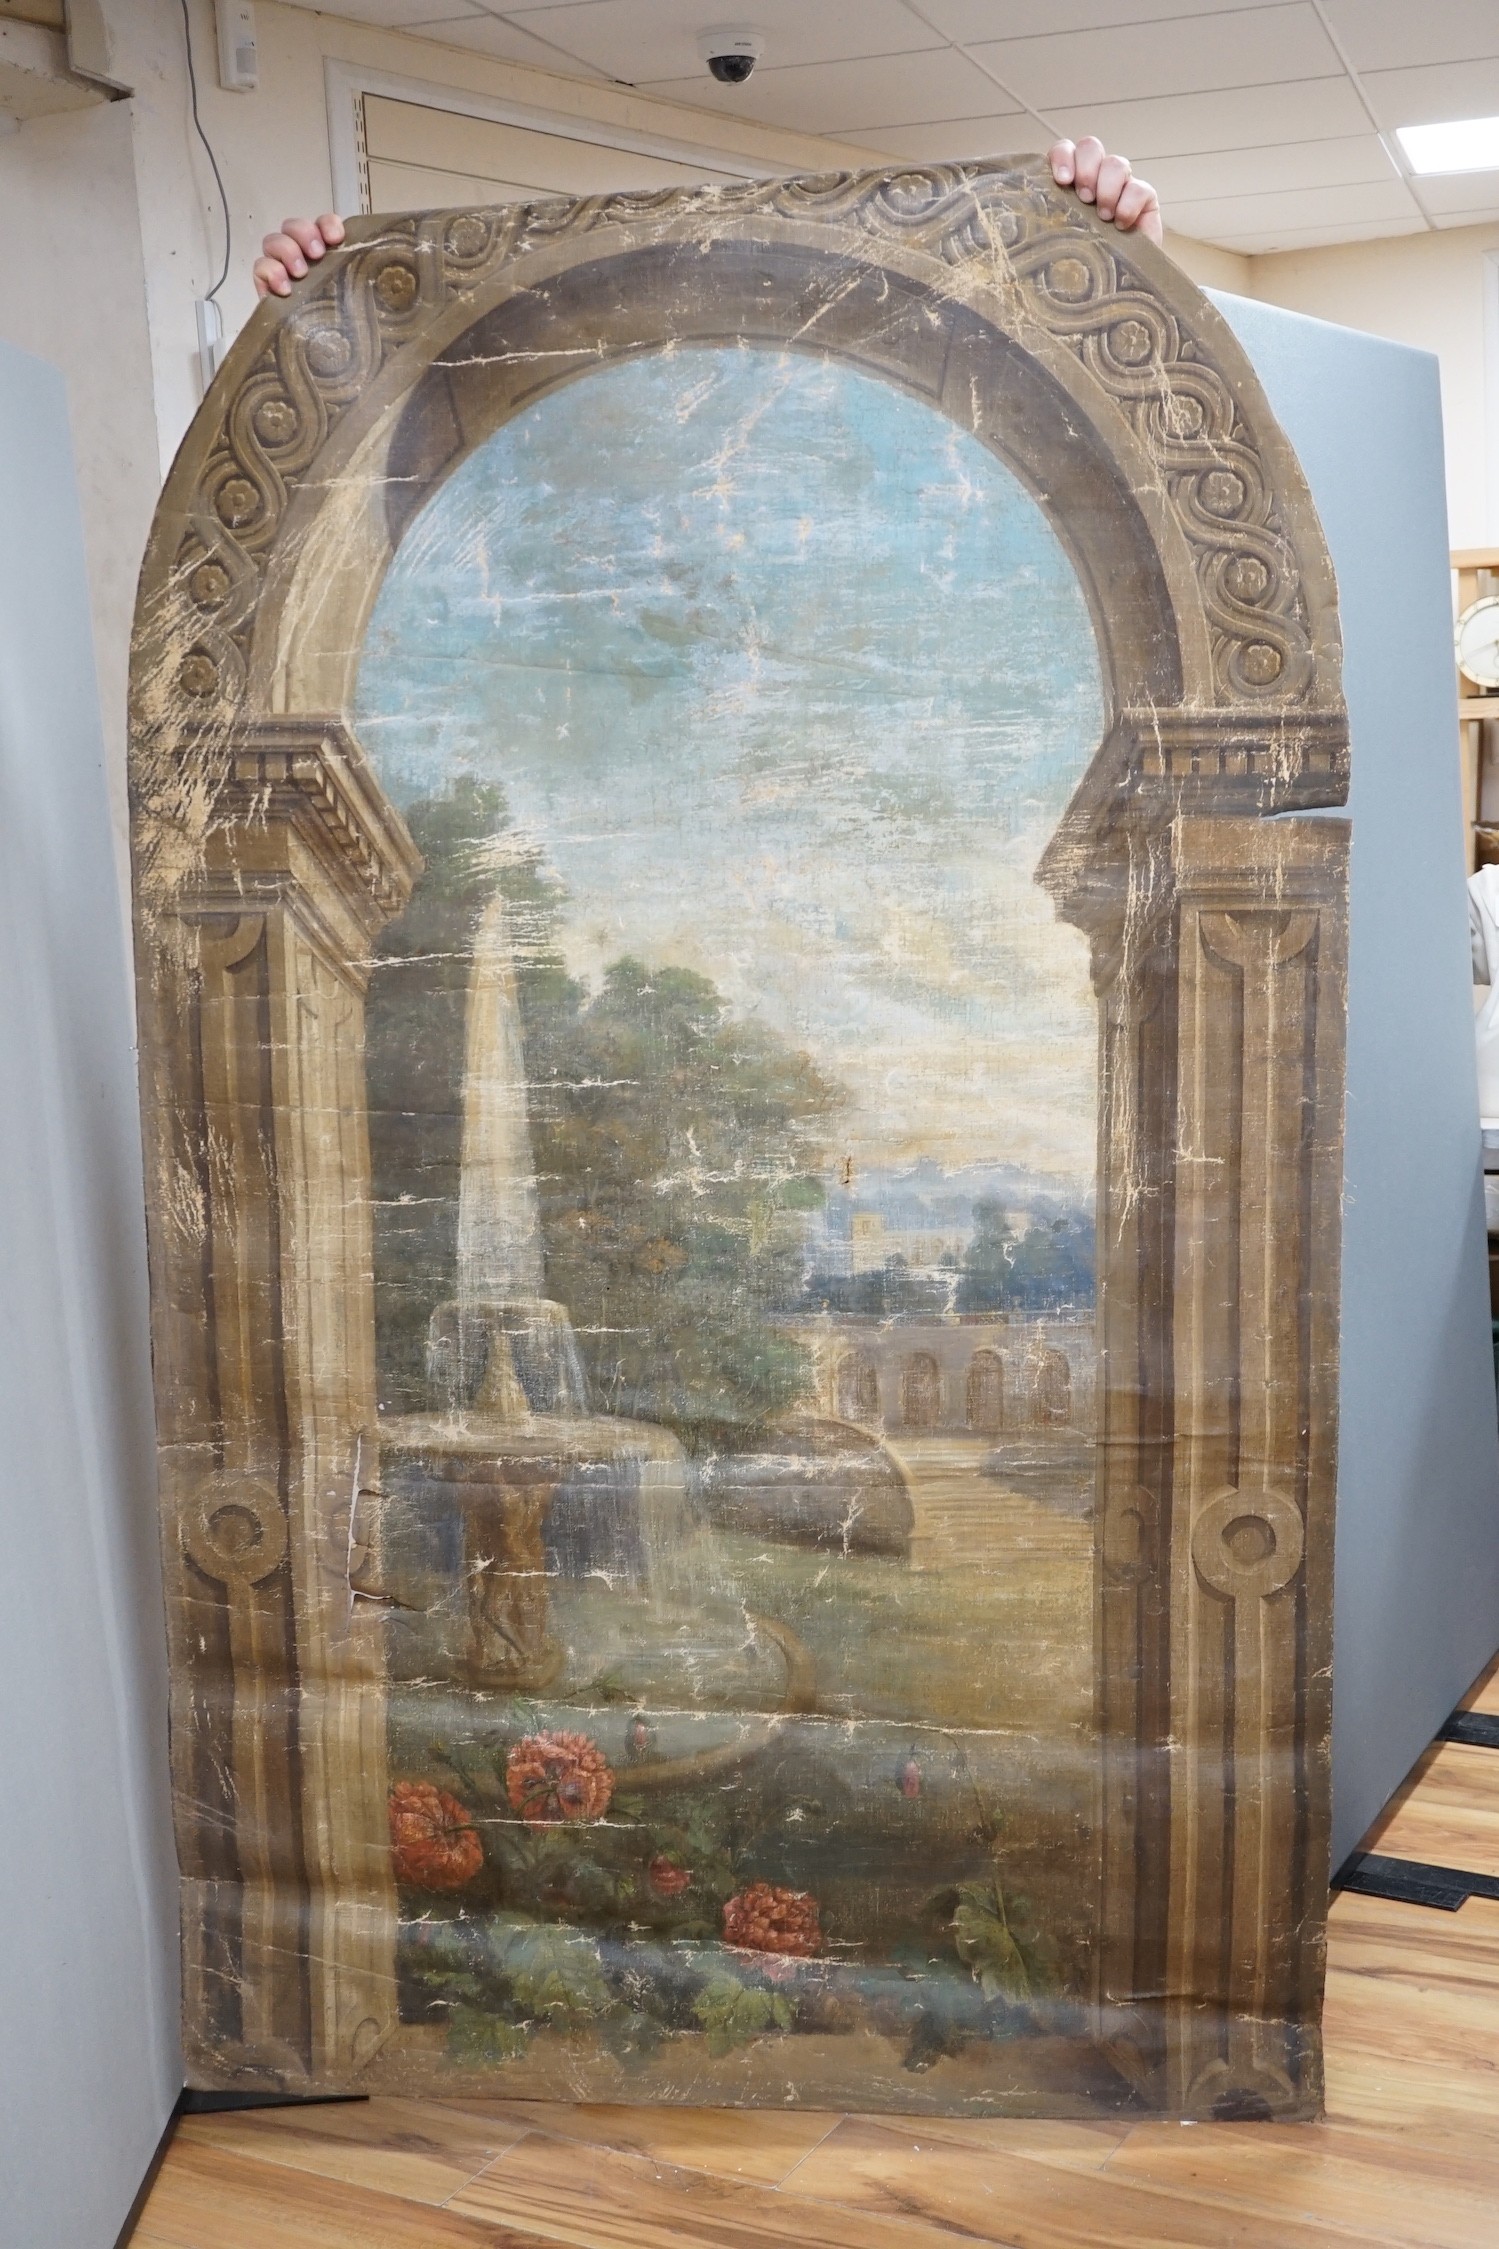 English School c.1900, set of six unstretched oils on canvas, Italianate landscapes painted for murals to be inset into arched niches, approximately 184 x 110cm